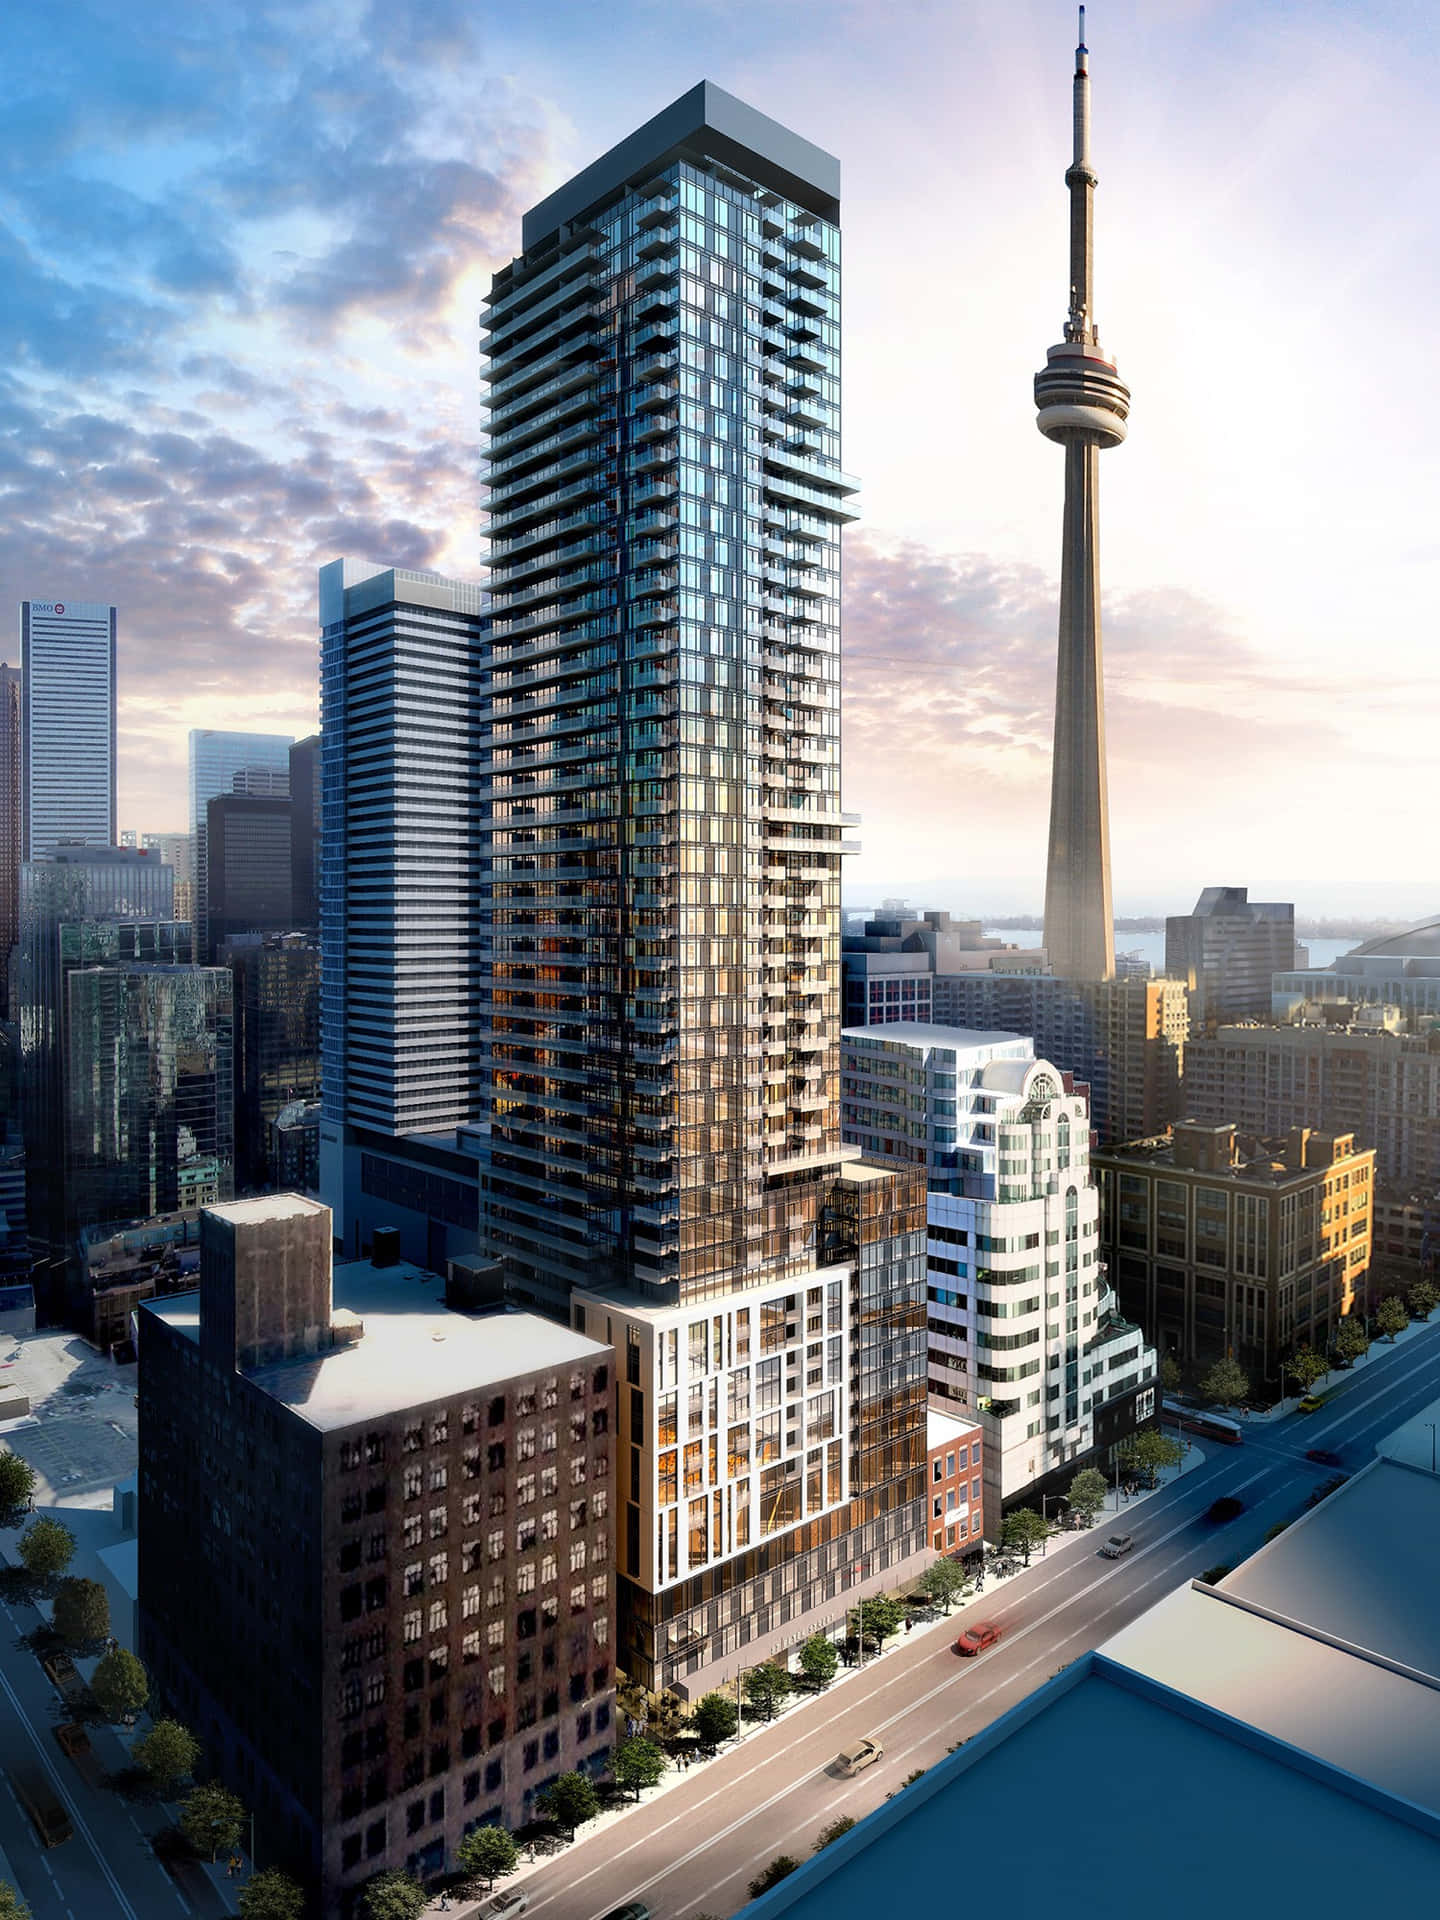 A Rendering Of A Building With A Cn Tower In The Background